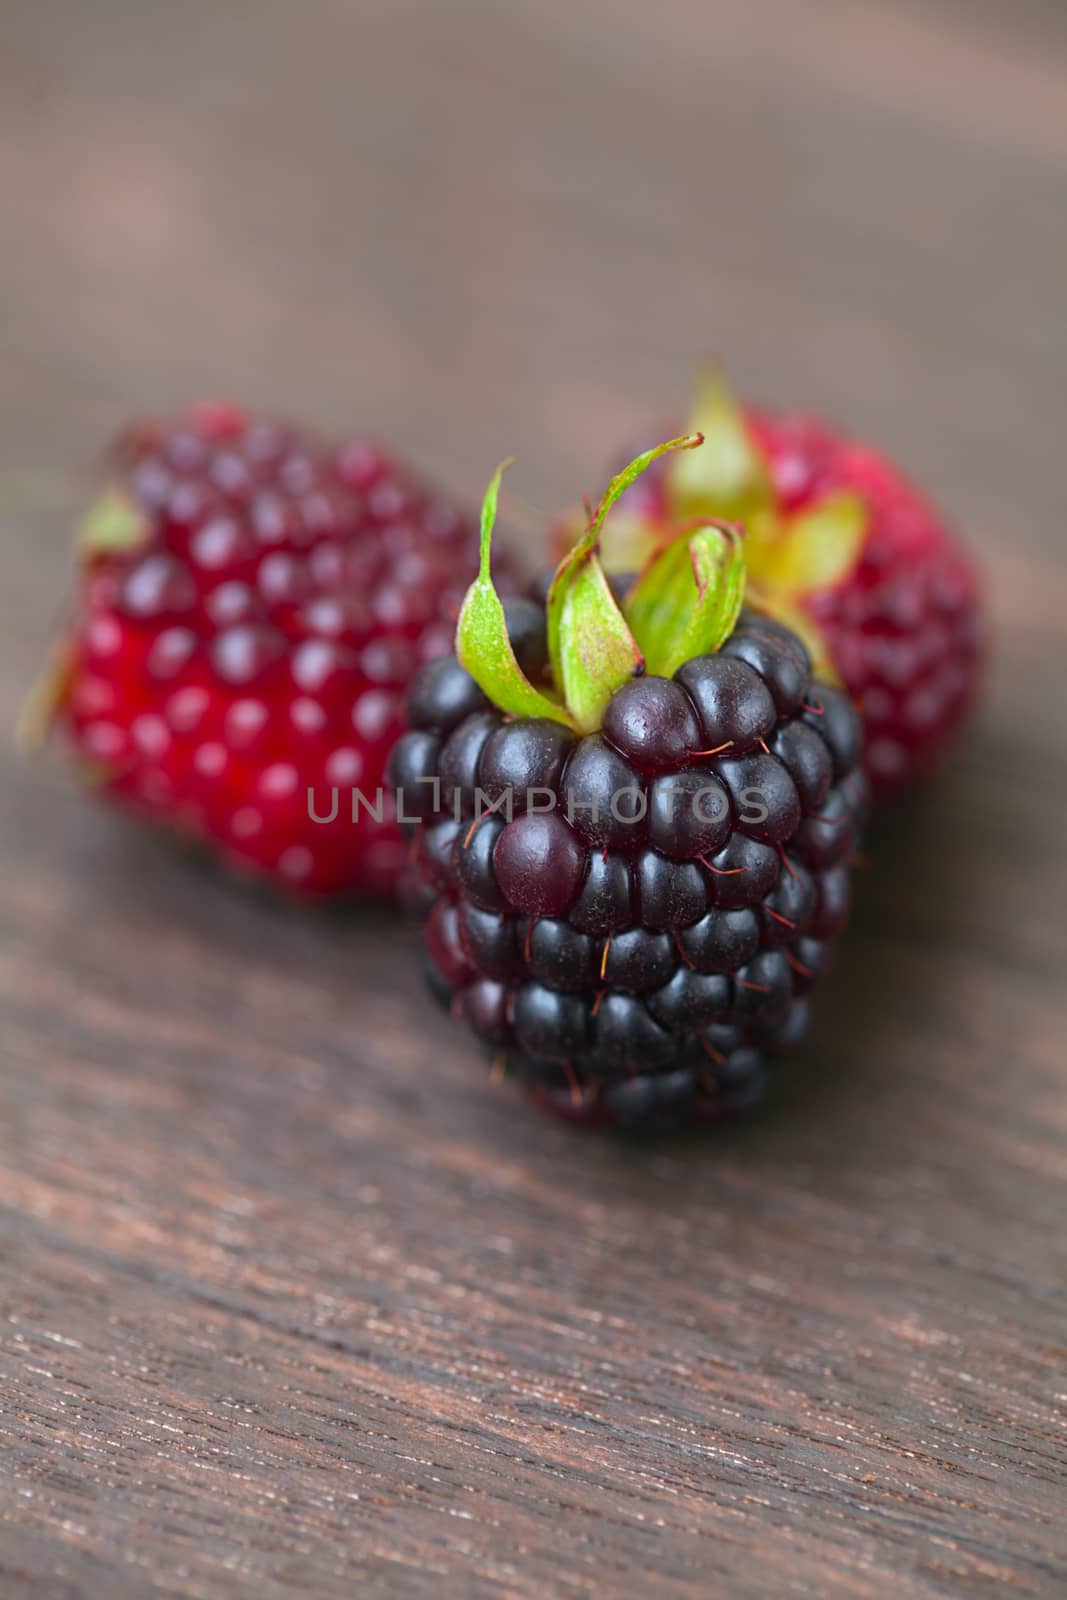 three juicy blackberries on a wooden surface by jannyjus